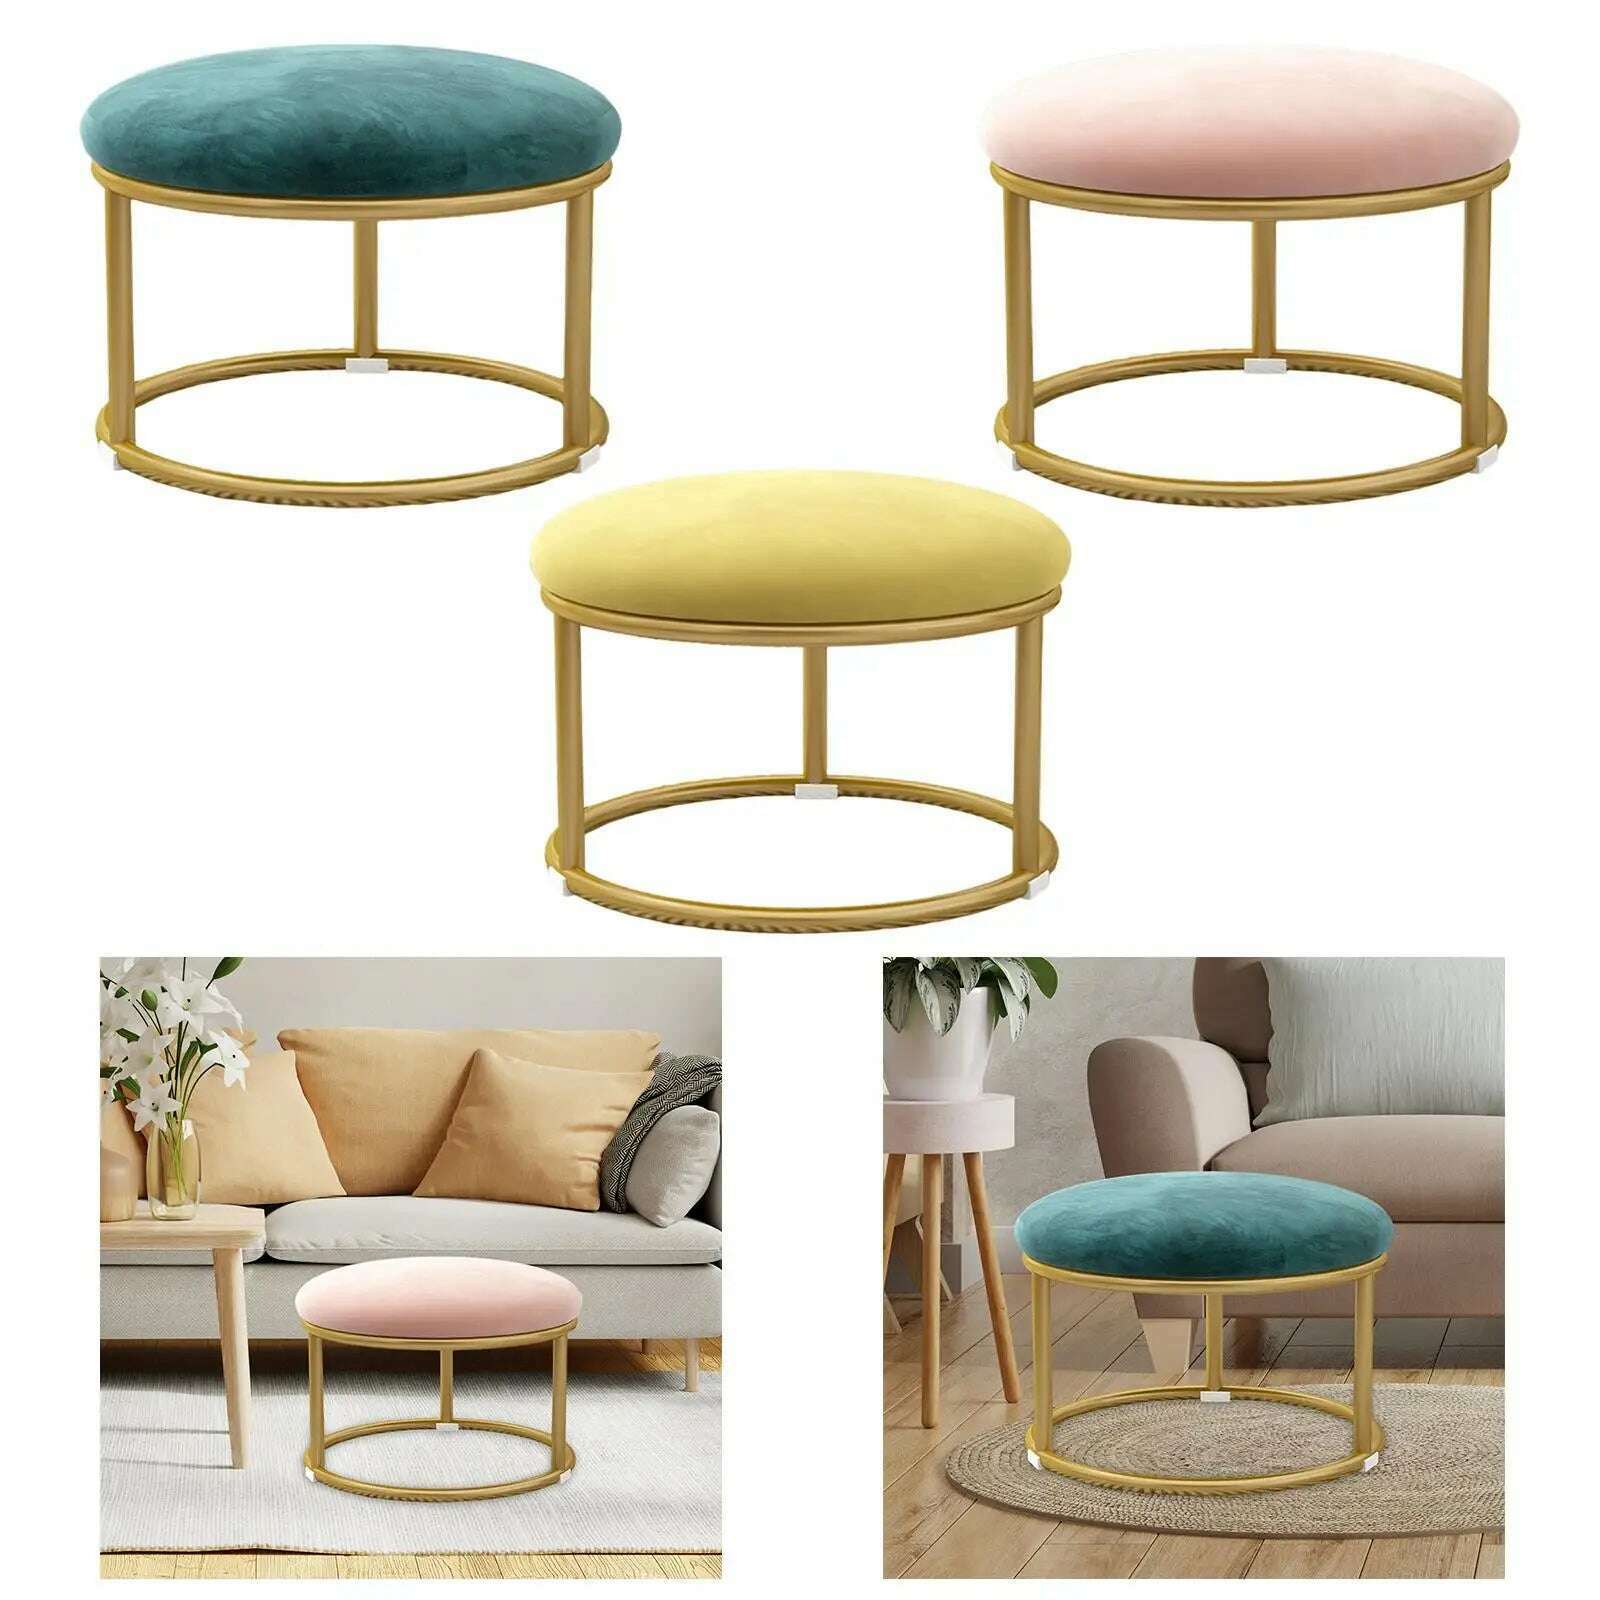 KIMLUD, Small Footstool Chair Stable Shoe Changing Stool Sofa Tea Stool Stylish Ottoman for Living Room Bedside Entryway Nursery Office, KIMLUD Womens Clothes